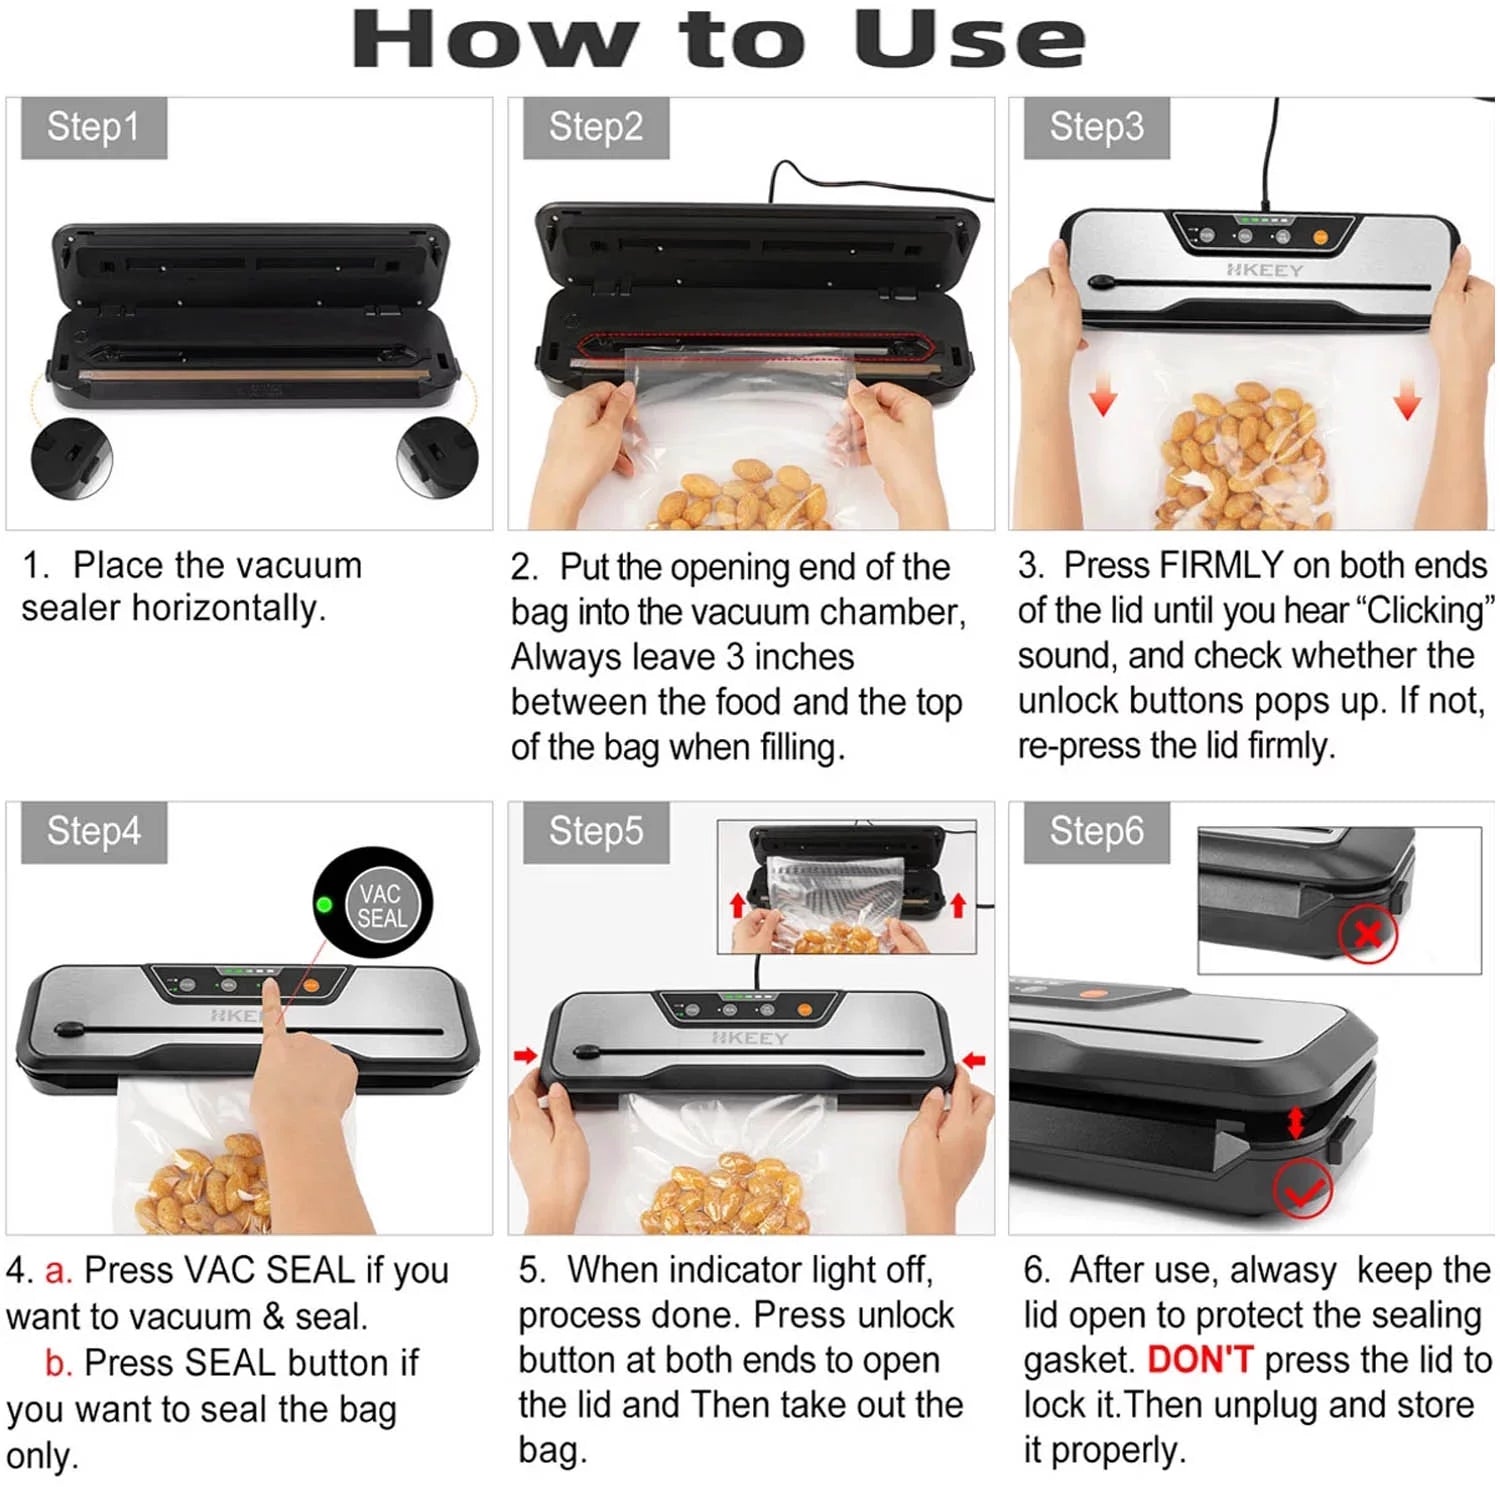 Food Vacuum Sealer Machine with 2 Rolls Food Vacuum Sealer Bags ，Food Storage Saver Dry & Moist Food Modes, Led Indicator Lights, Easy to Clean, Compact Design